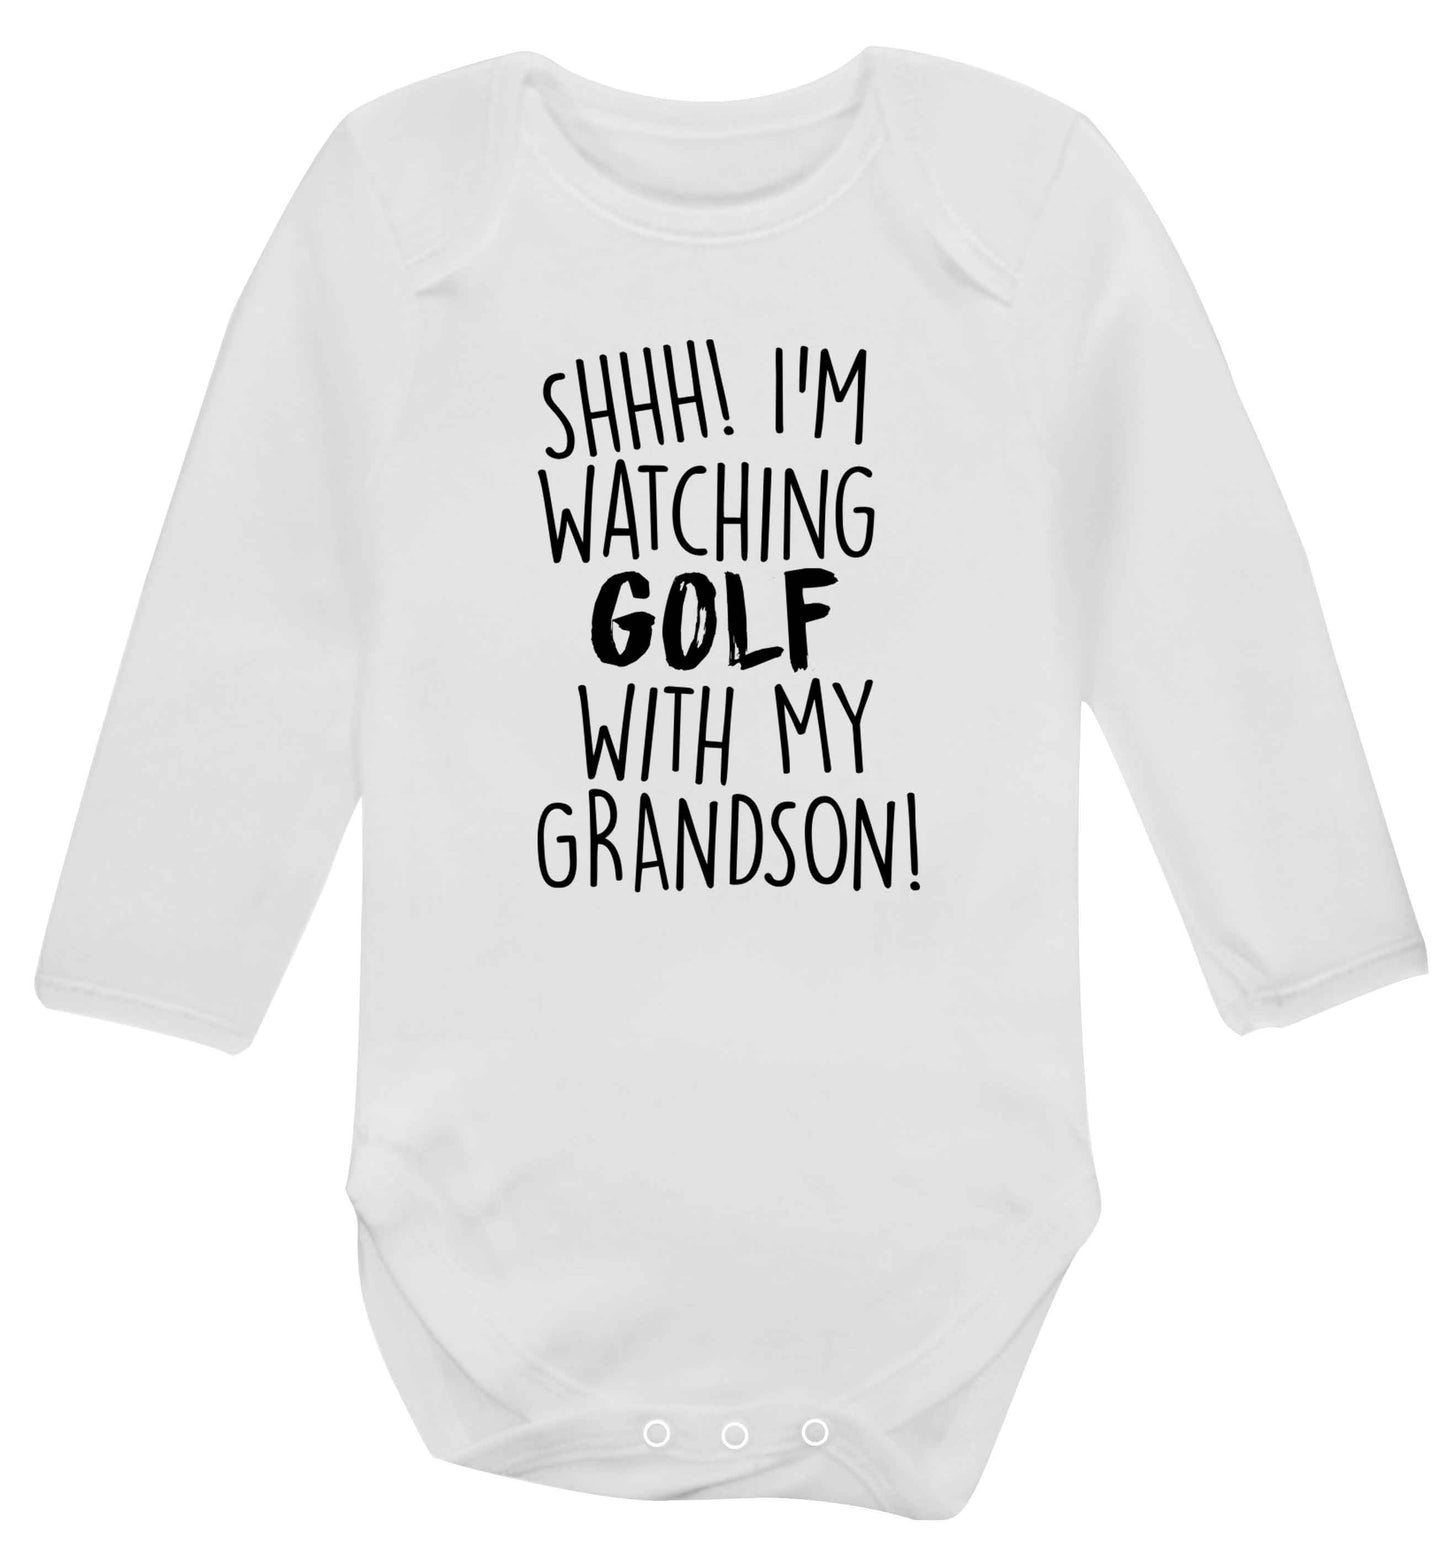 Shh I'm watching golf with my grandsonBaby Vest long sleeved white 6-12 months